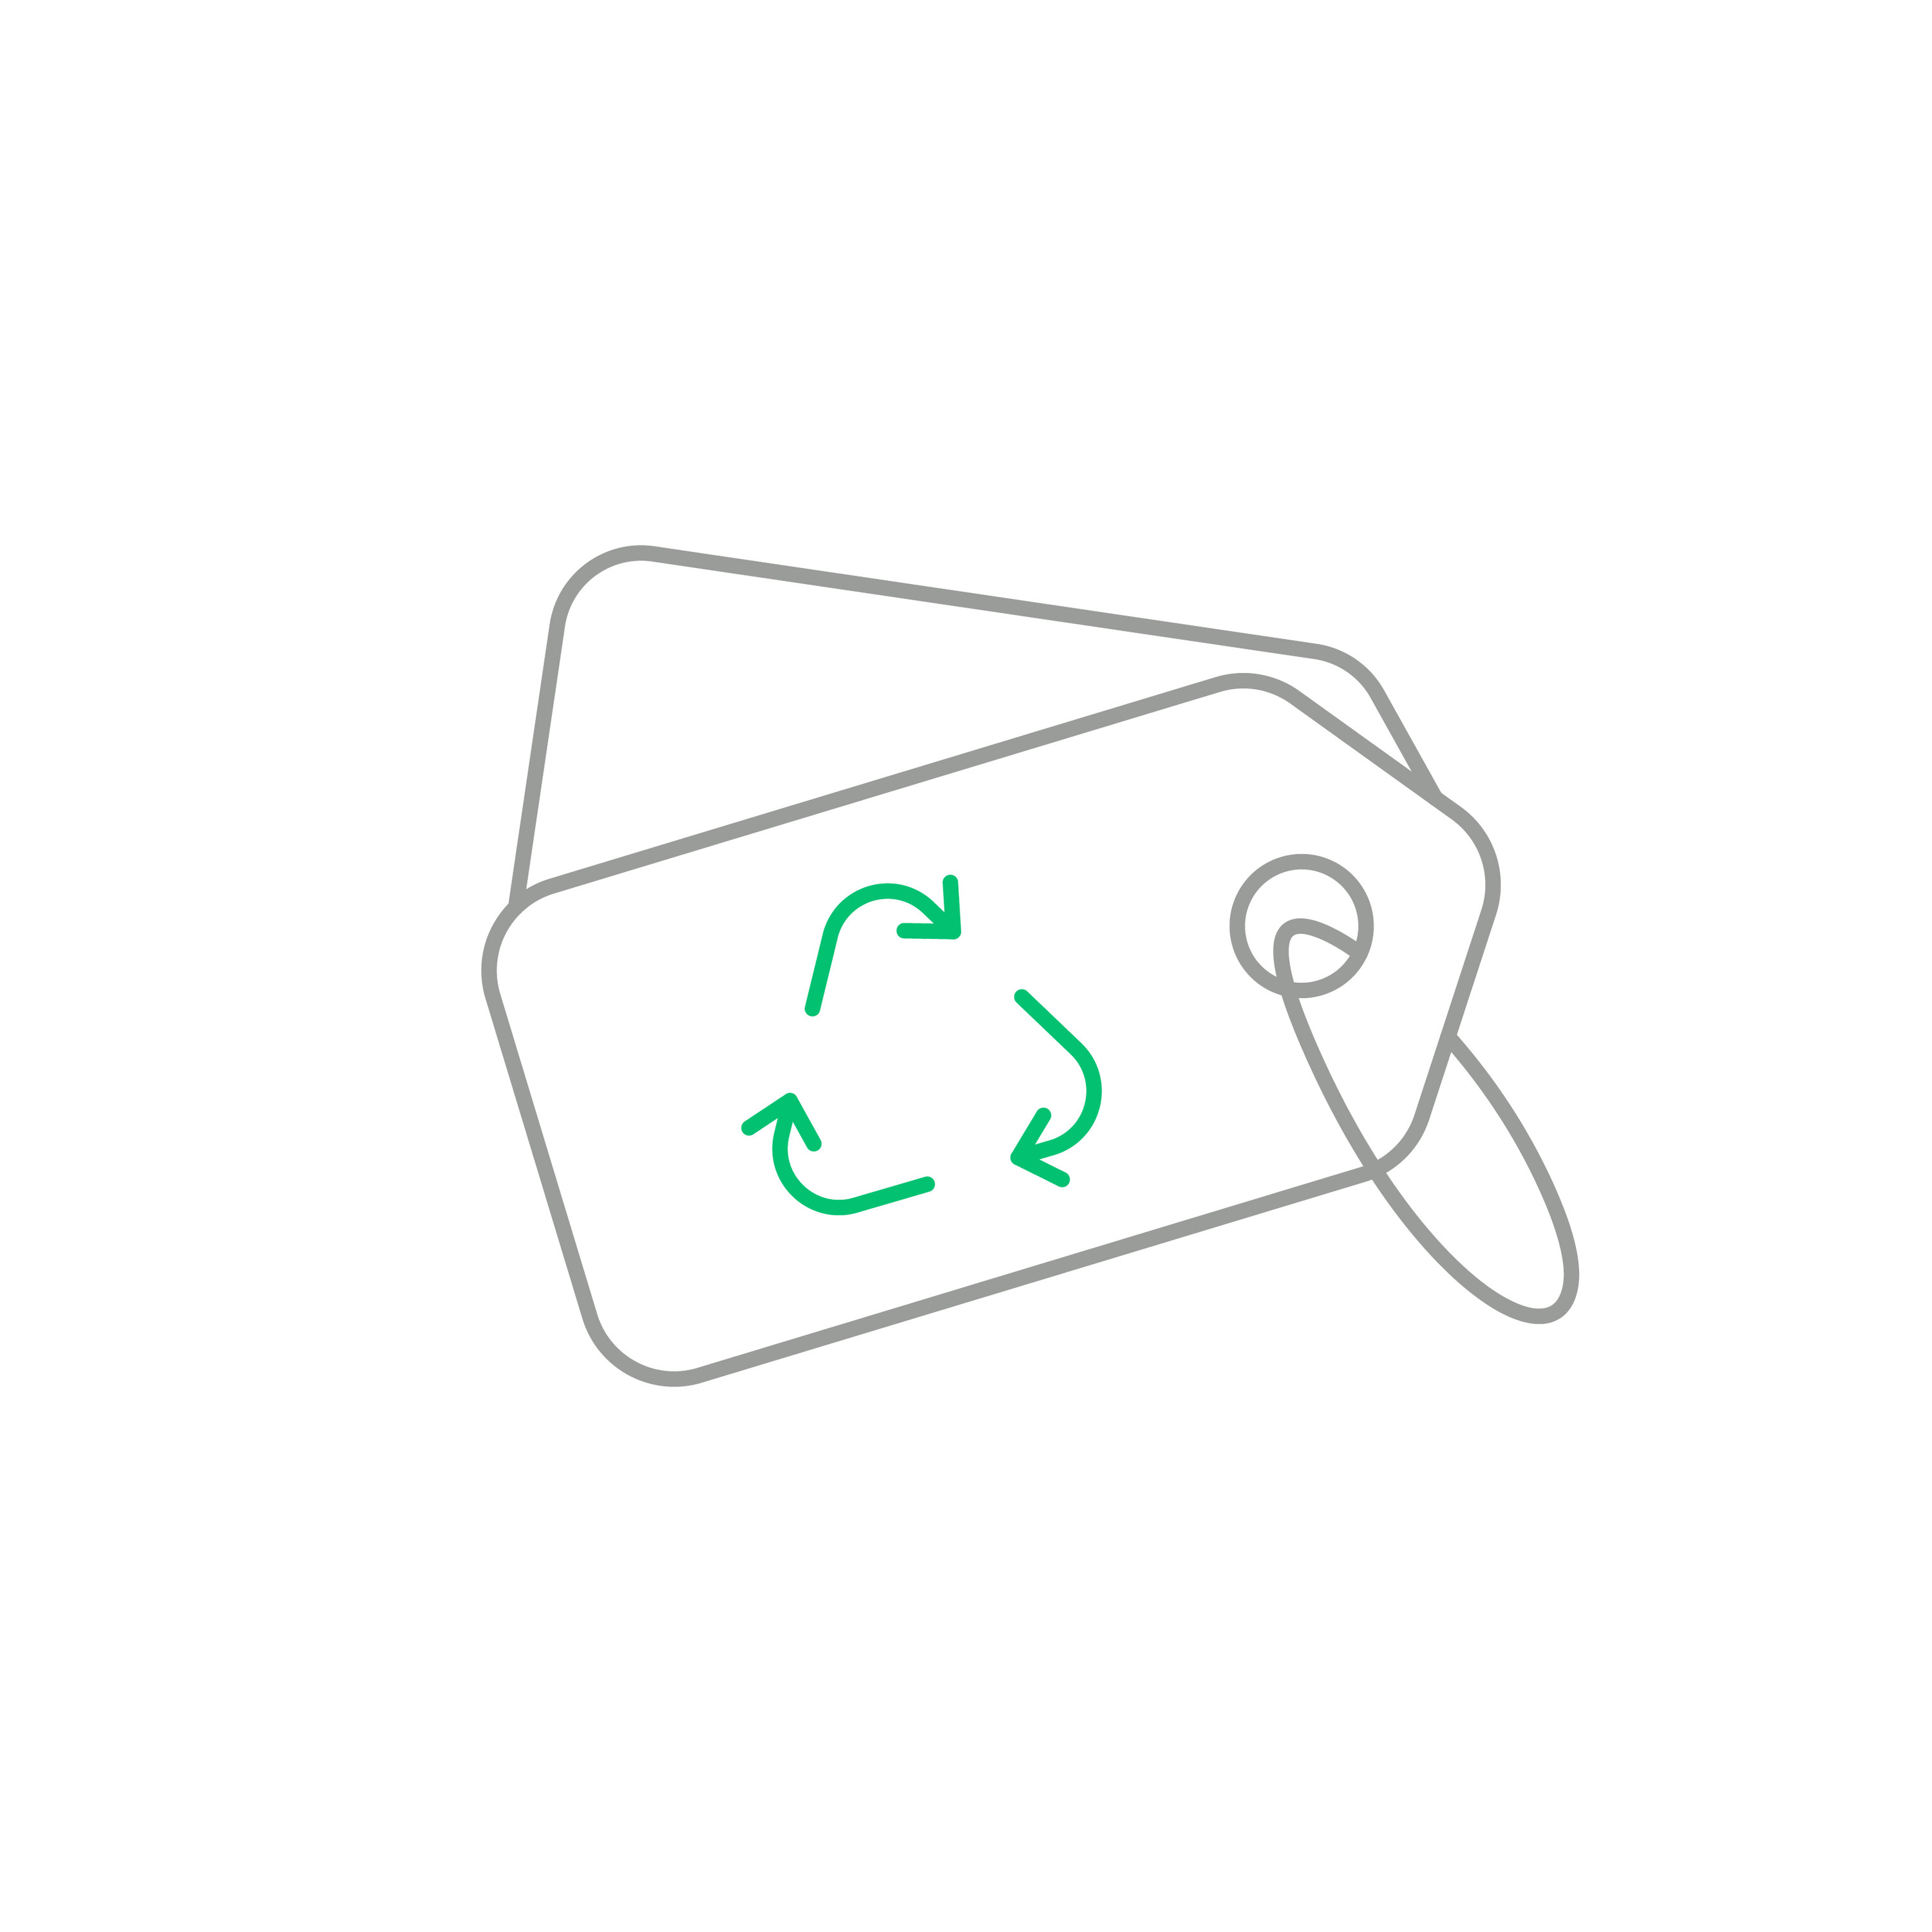 Responsible Fashion Product Label Line Icon with recycle symbol